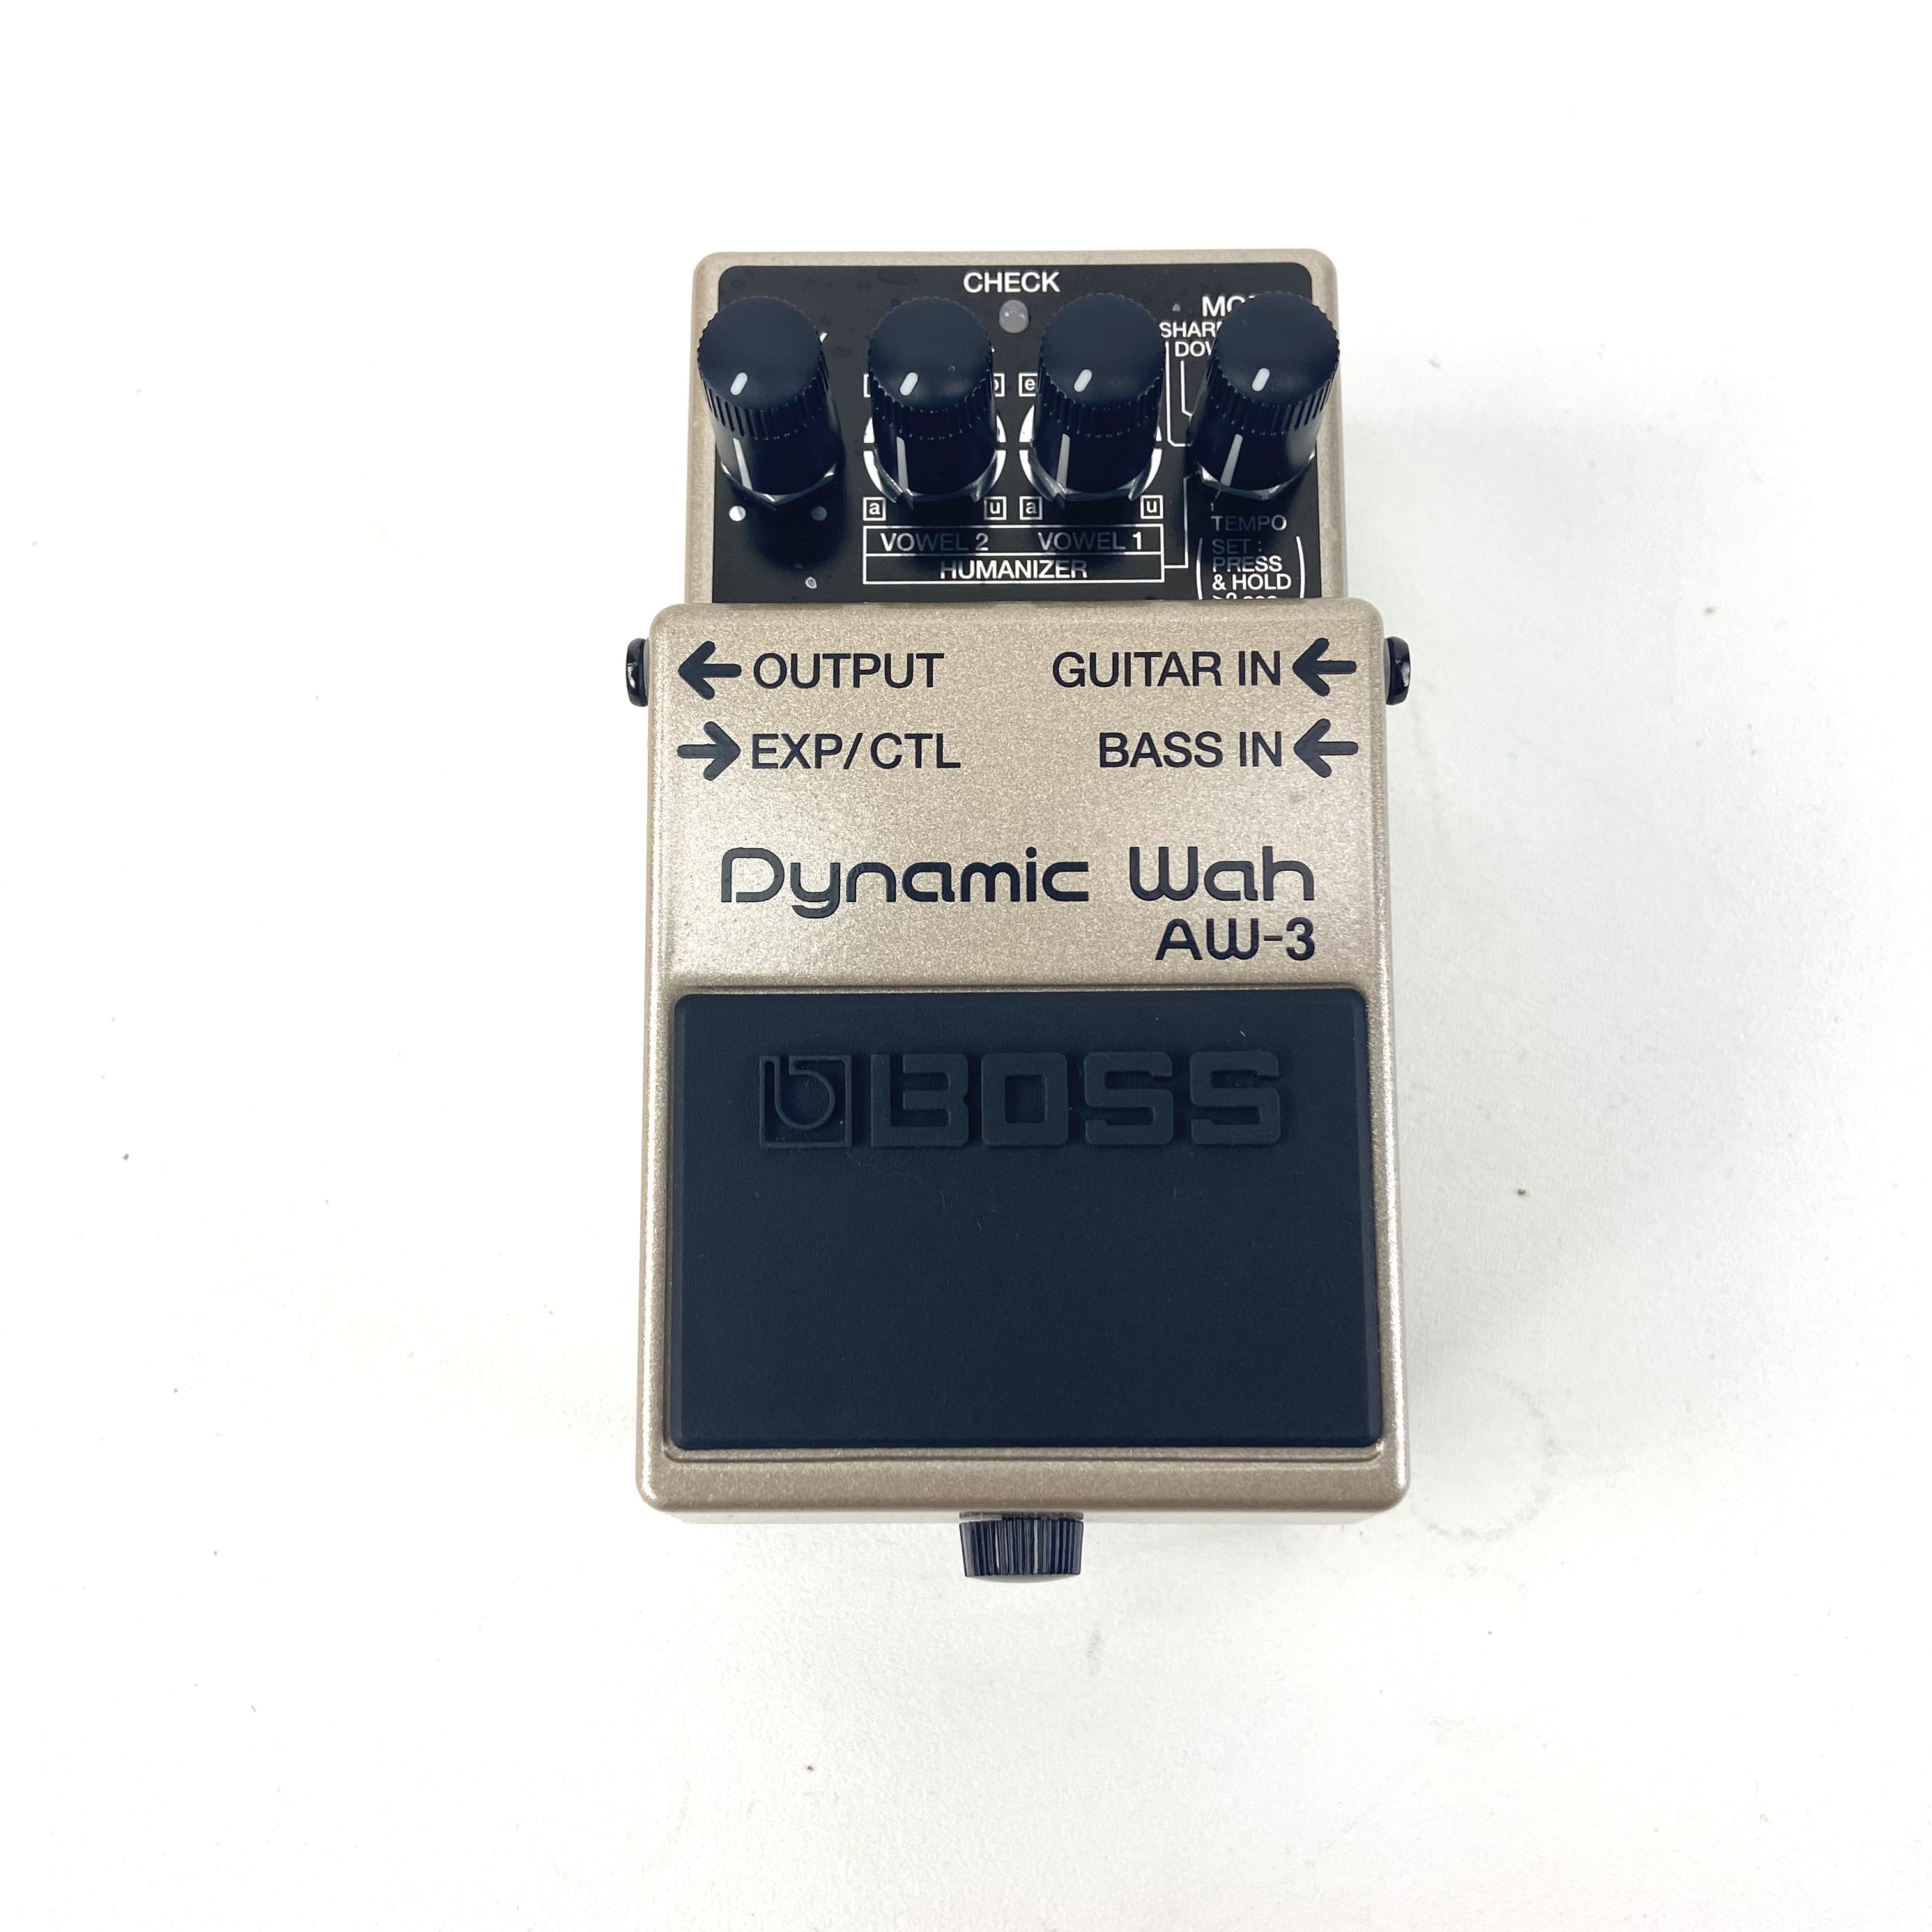 AW-3　WAH　EFFECTS　PRE-OWNED　GUITAR　DYNAMIC　BOSS　PEDAL